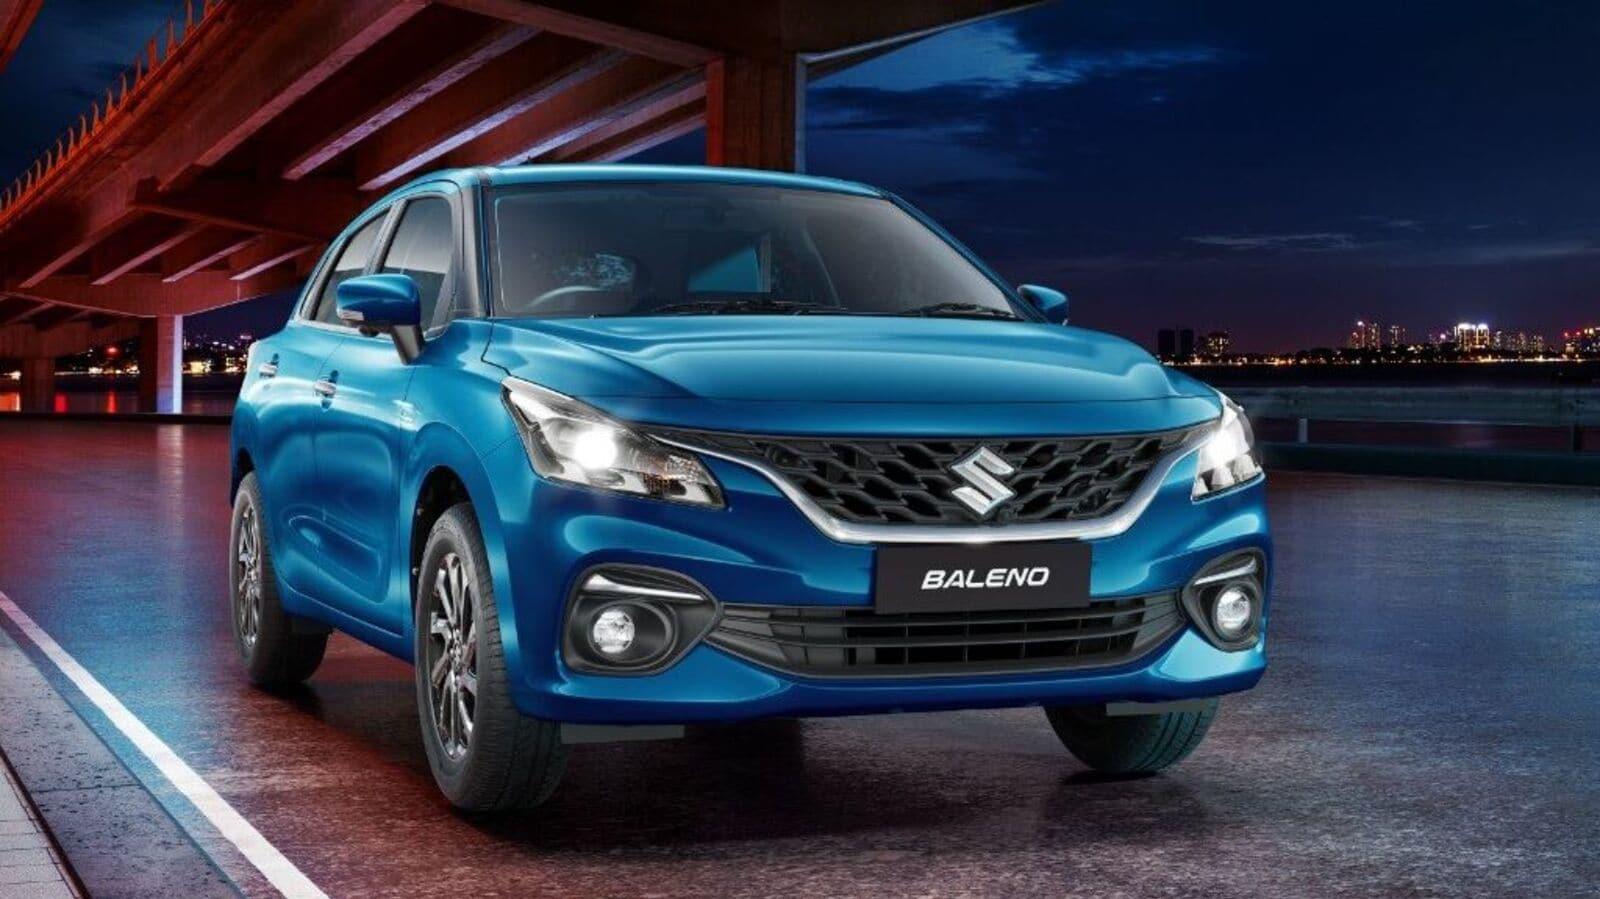 Maruti Suzuki Baleno Facelift Launched At A Starting Price Of